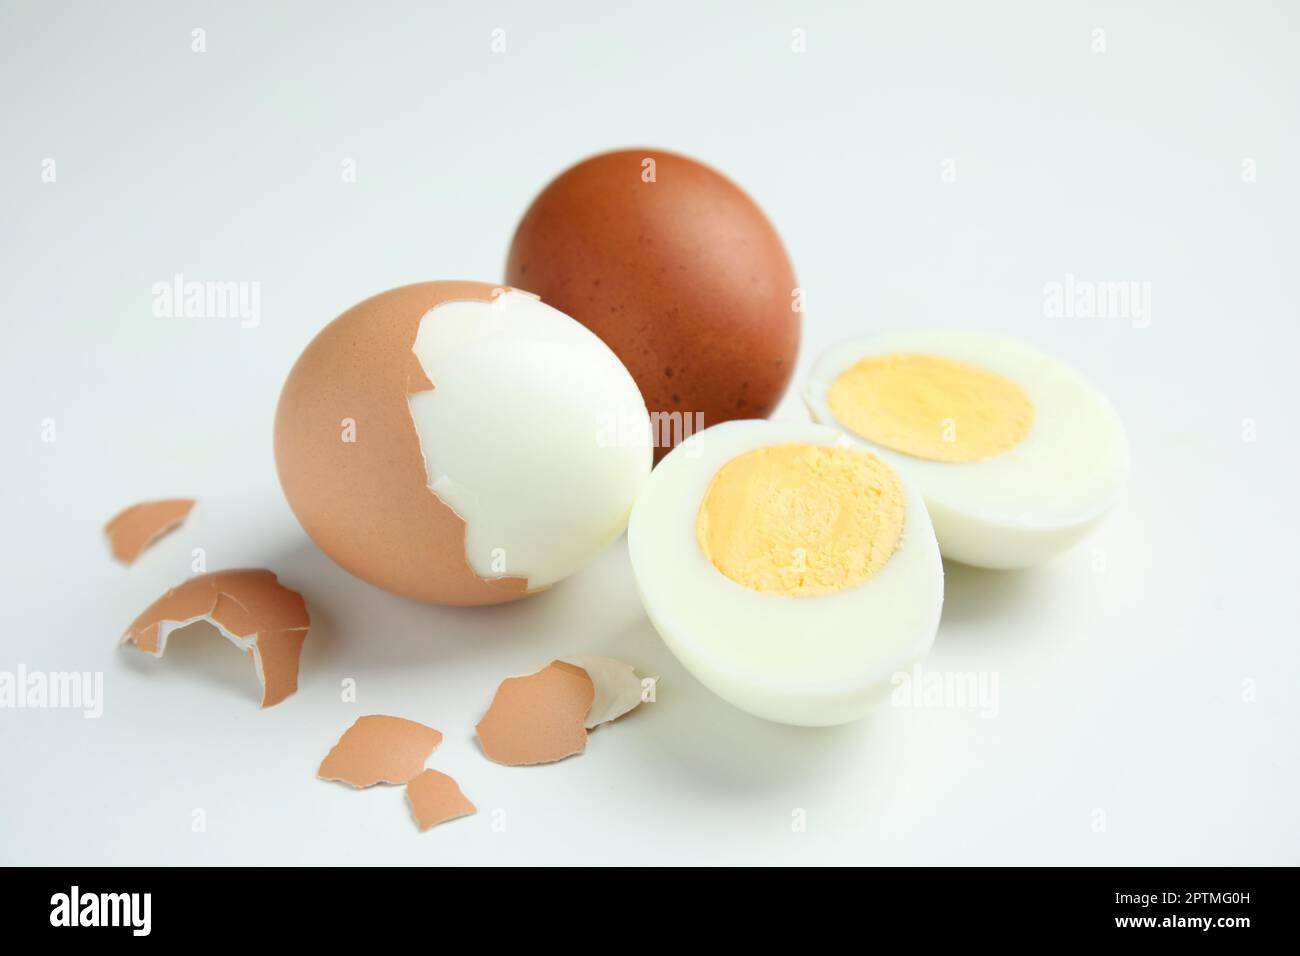 Hard boiled eggs and pieces of shell on white background Stock Photo